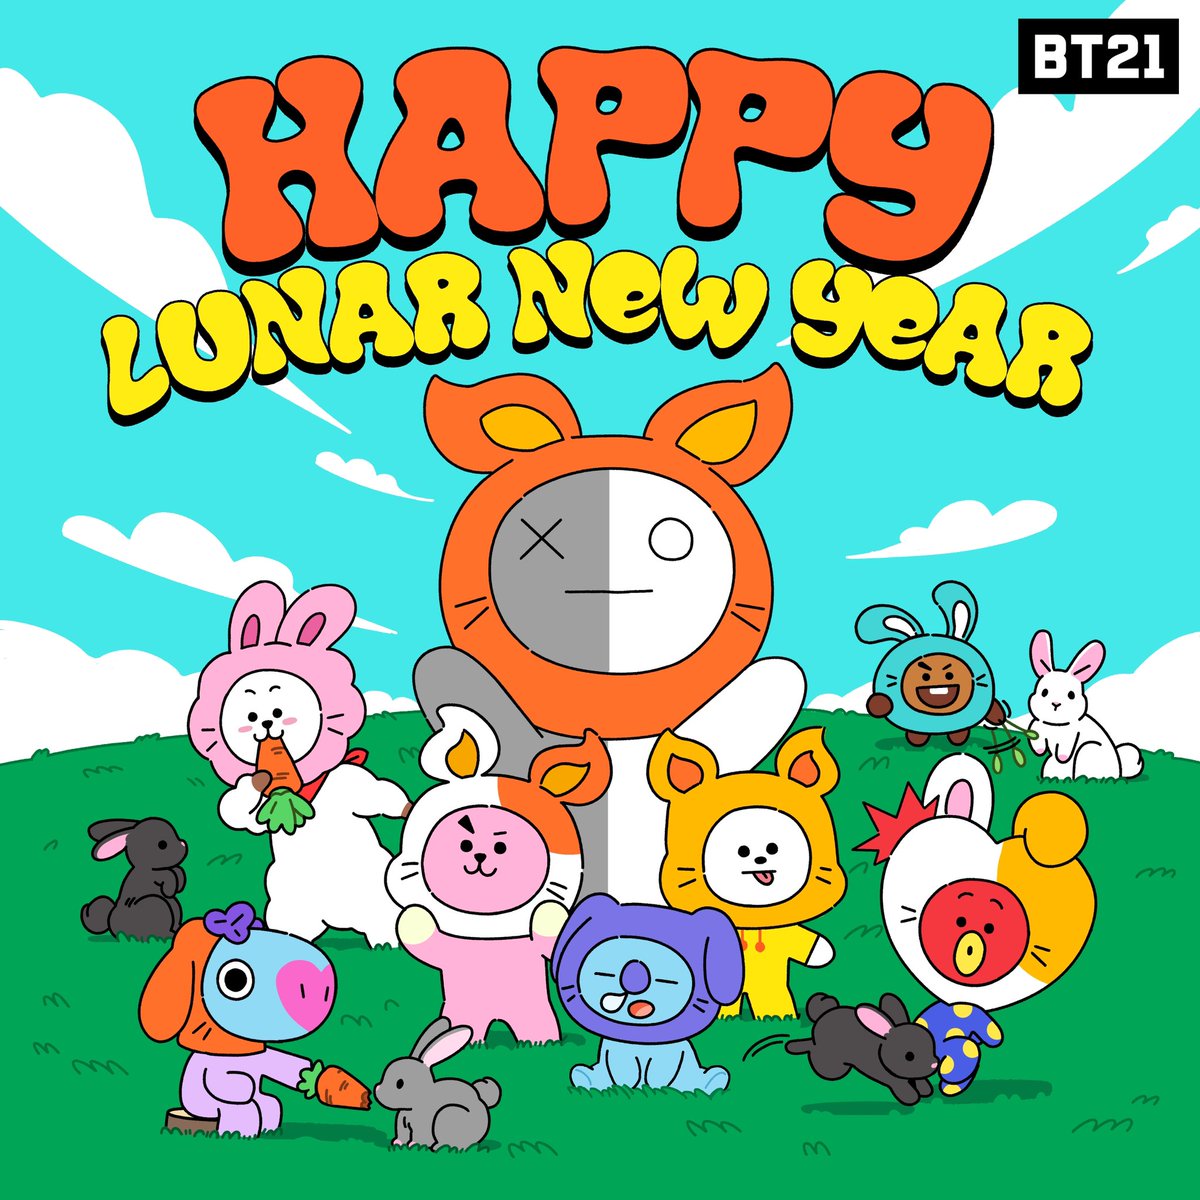 Happy Lunar New Year, UNISTARS!🎉 Look how adorable BT21 is with their rabbit costumes!🐰 May your 2023 be filled with love and joy💗 #HNY #LunarNewYear #YearoftheRabbit #BT21